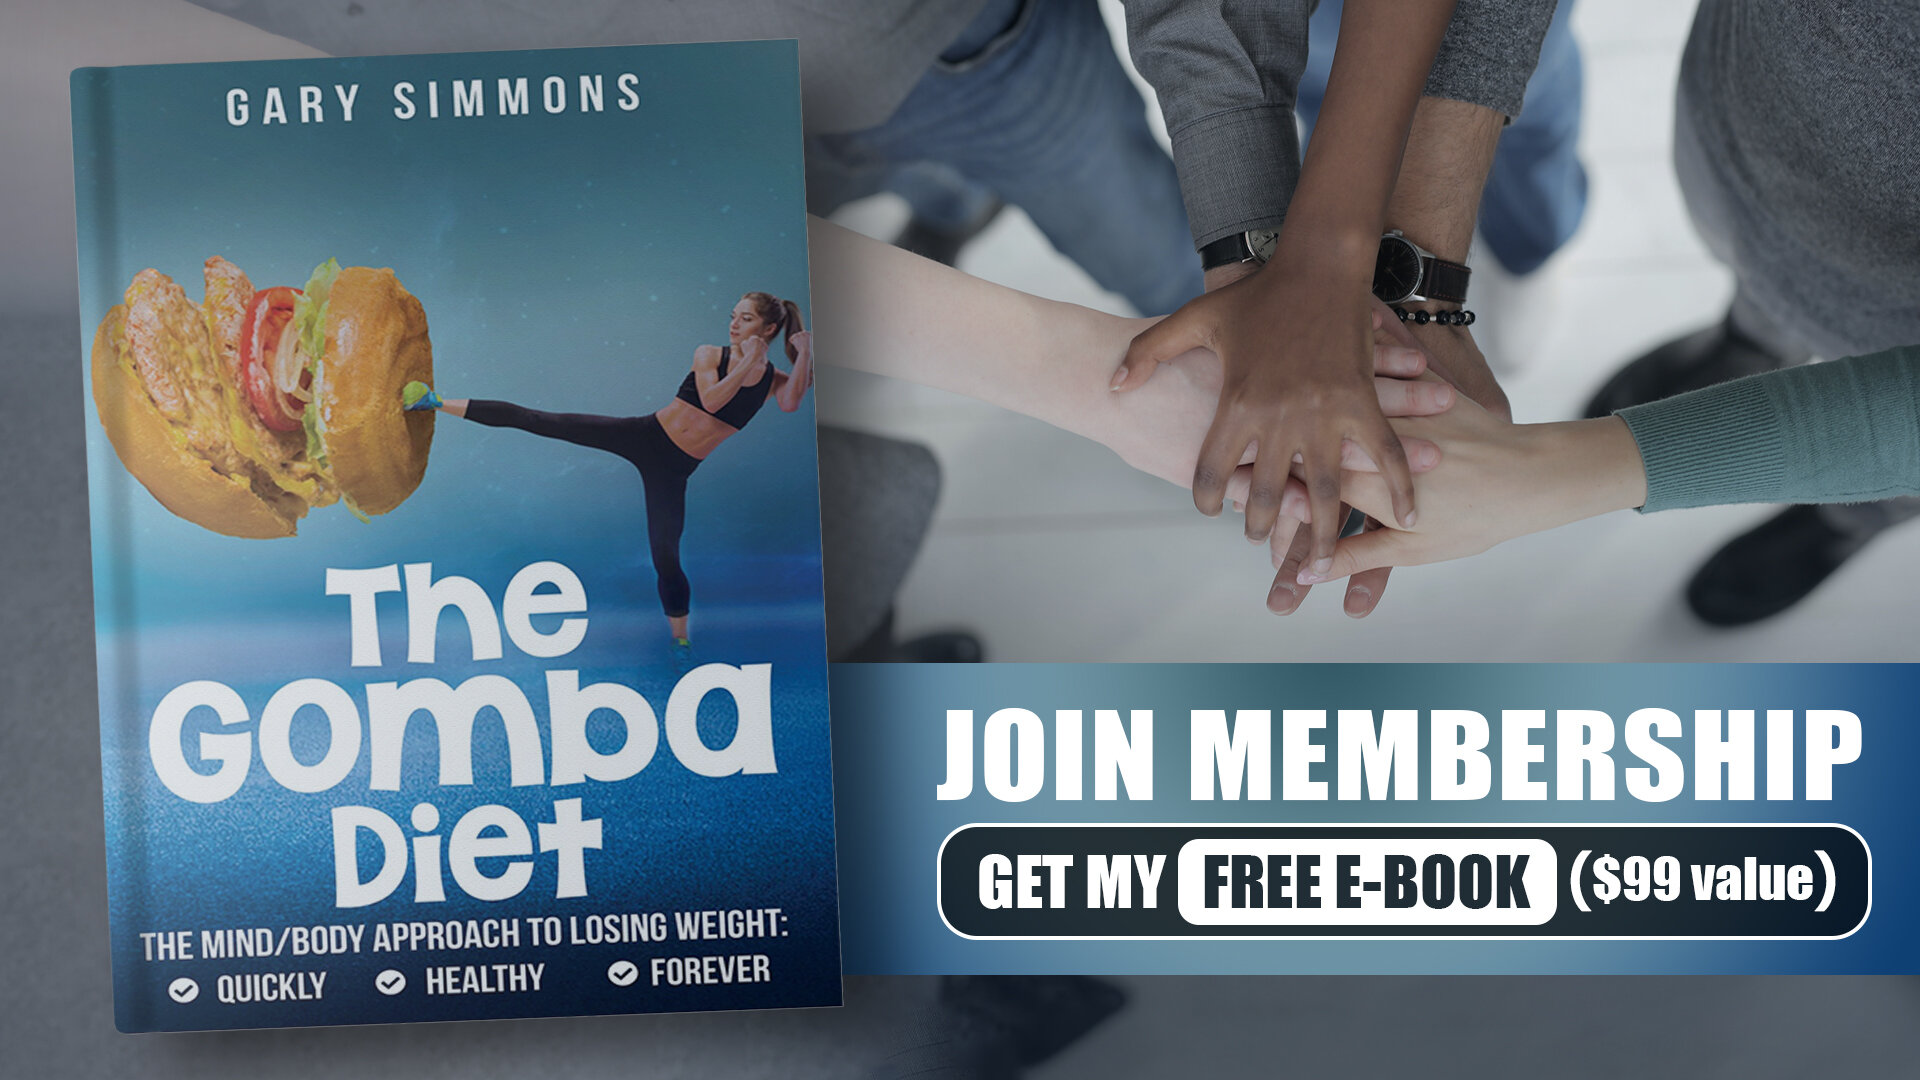 The Health Reset Movement Program By Gary Simmons